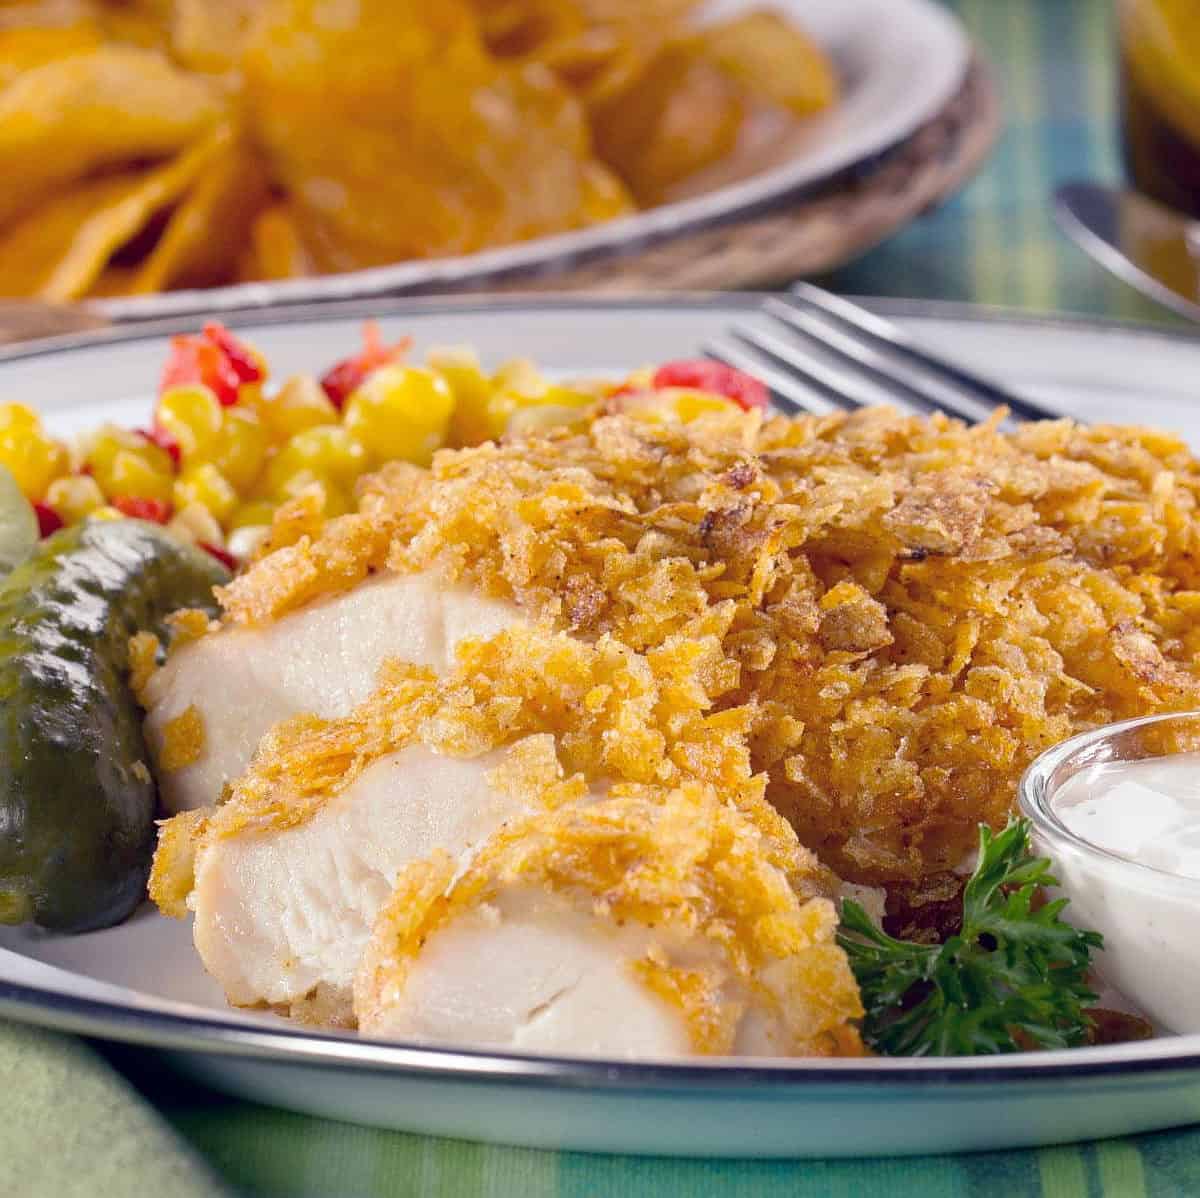  Get ready to enjoy the perfect balance of sweet and savory flavors with our barbecue chip chicken!